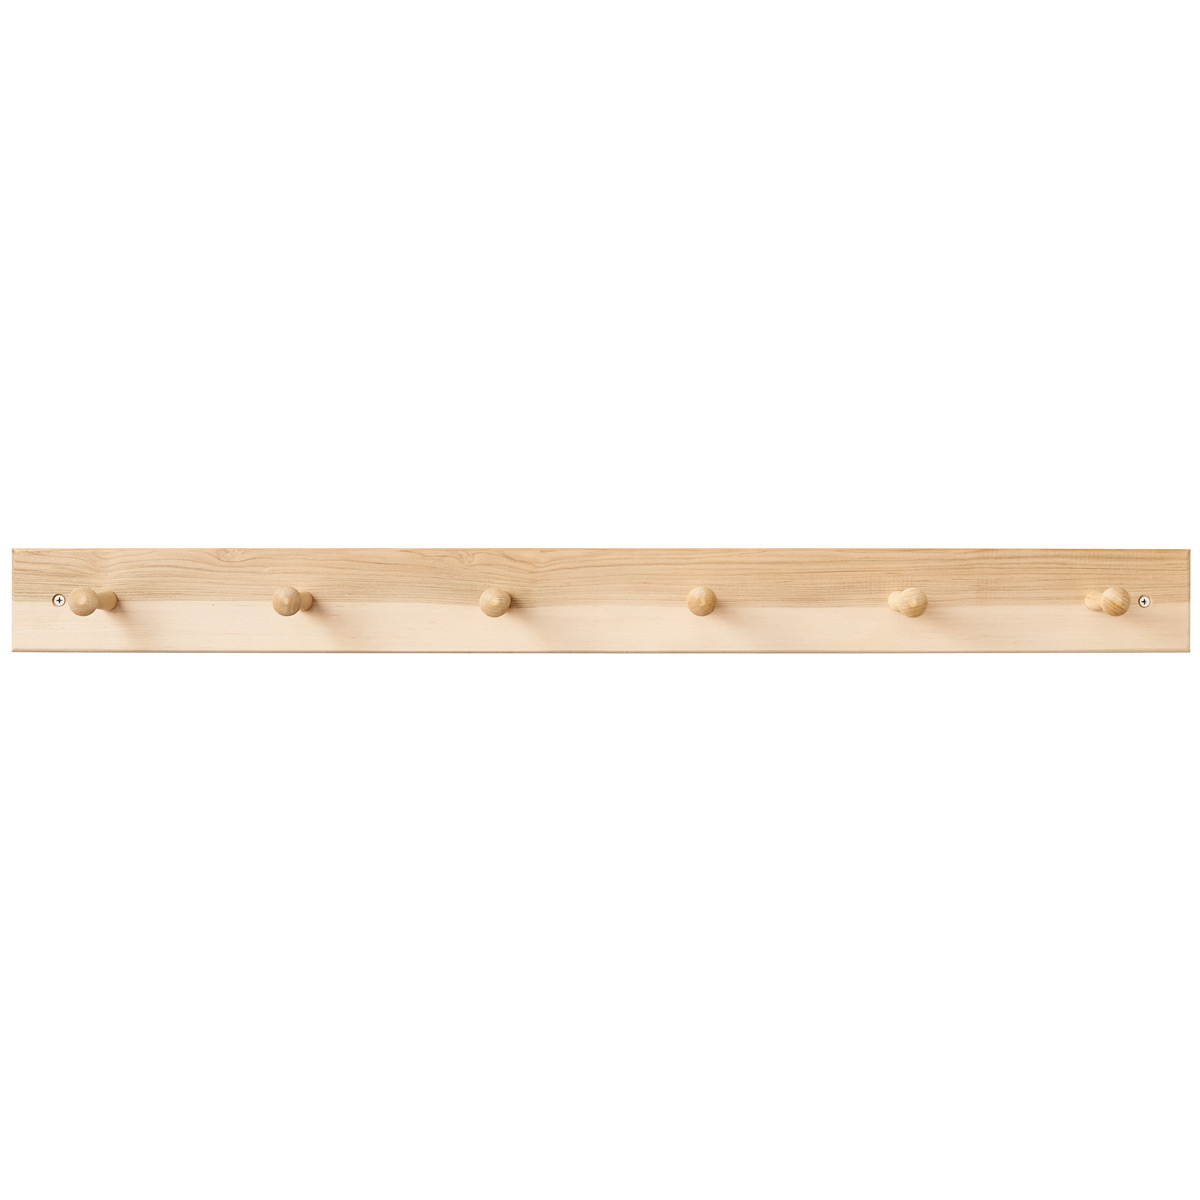 Maple Shaker Peg Racks | The Container Store